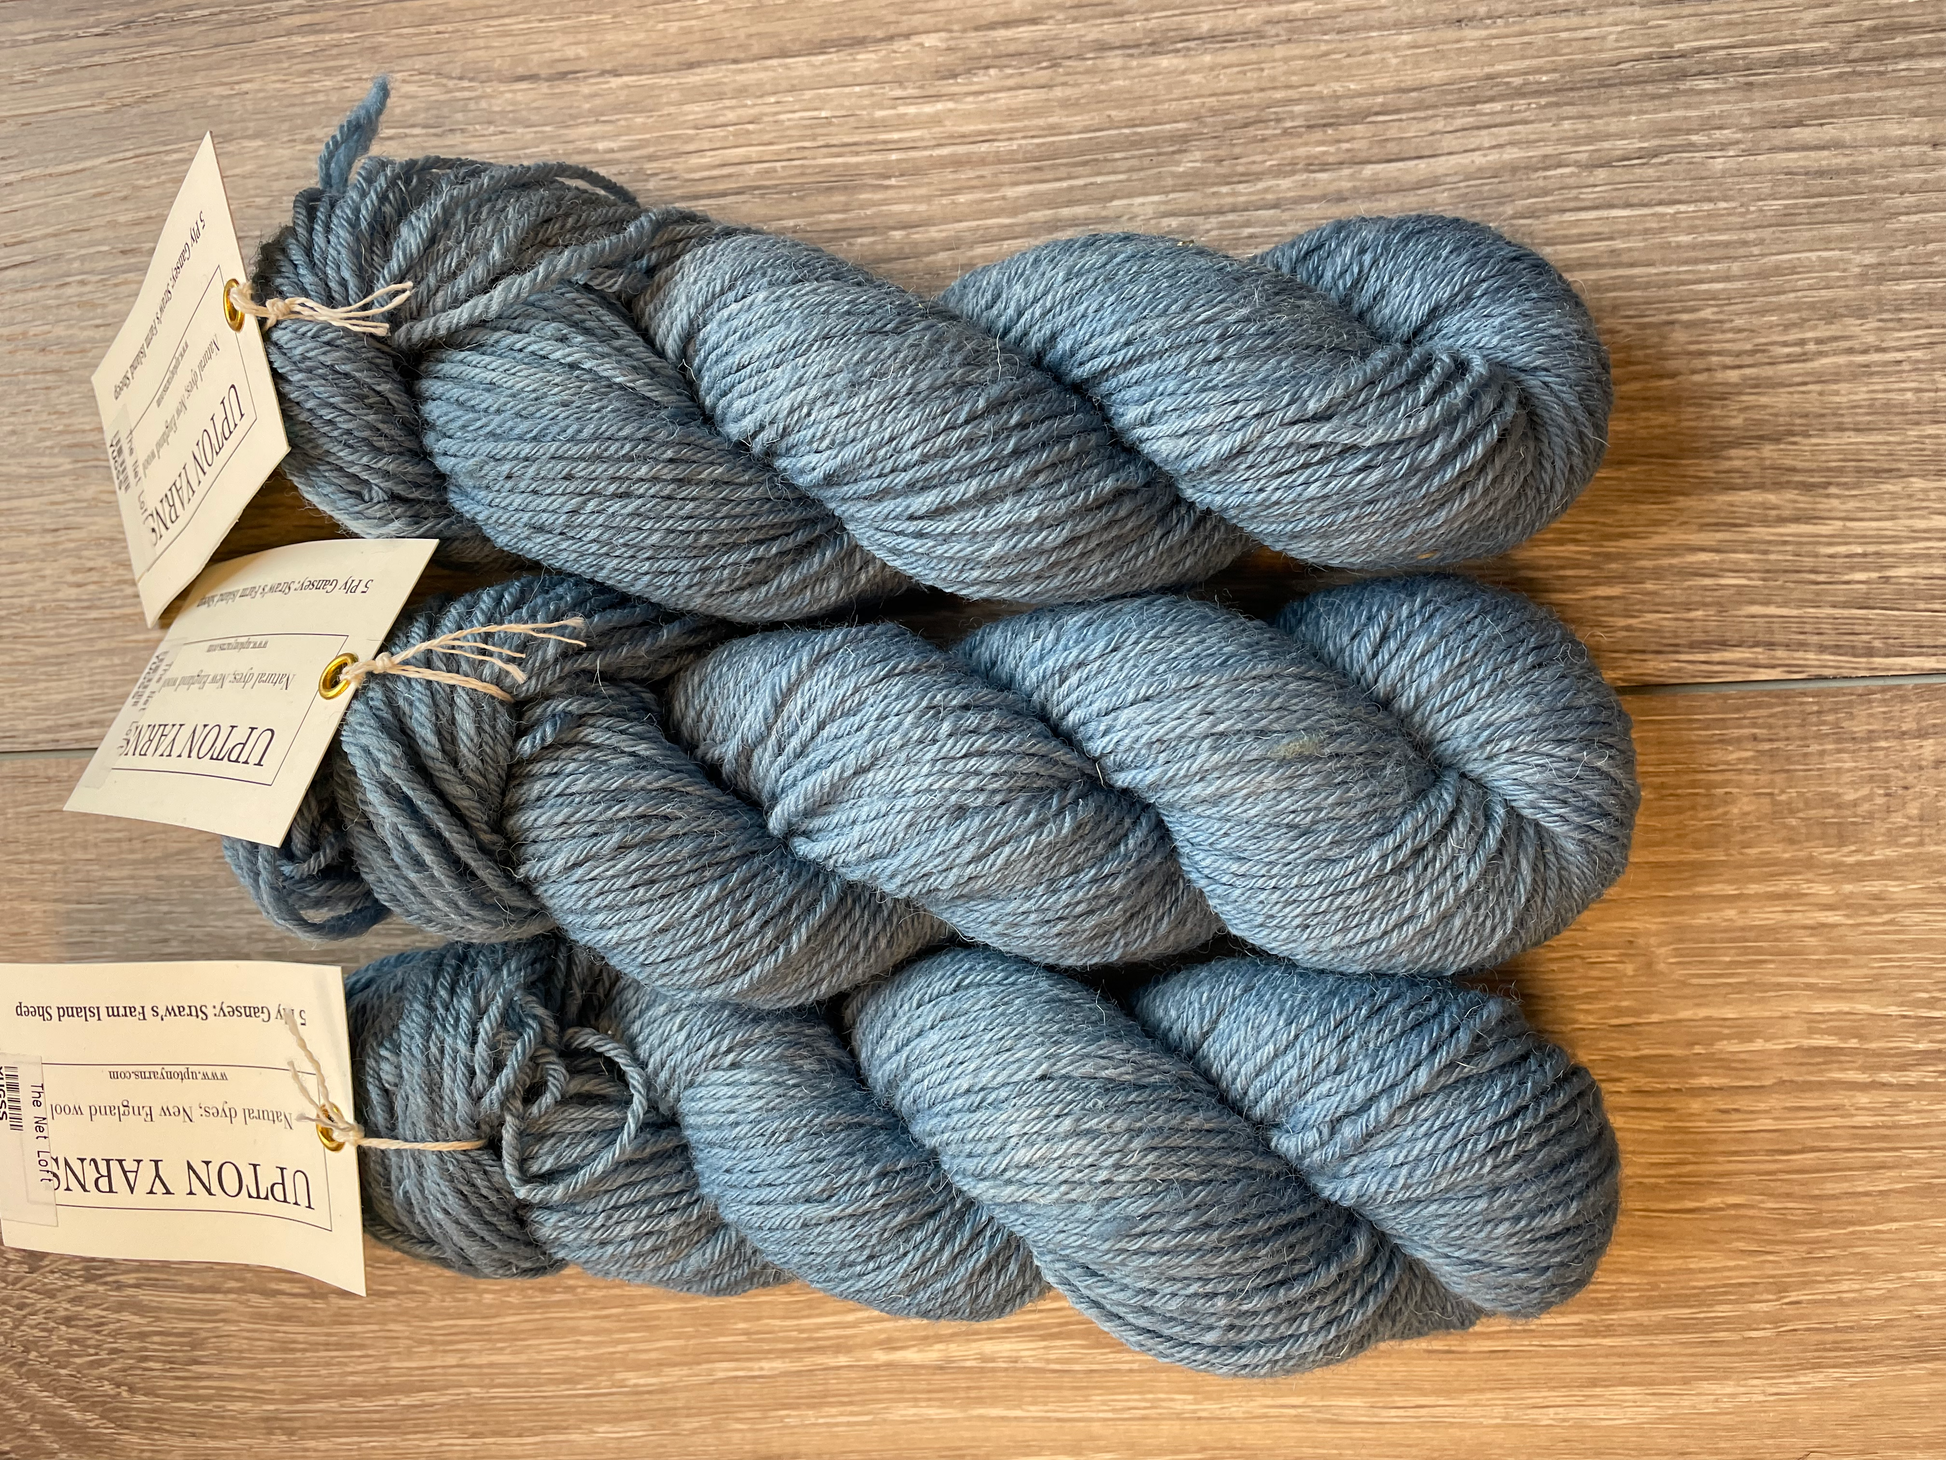 Indigo Yarn Photos and Images & Pictures